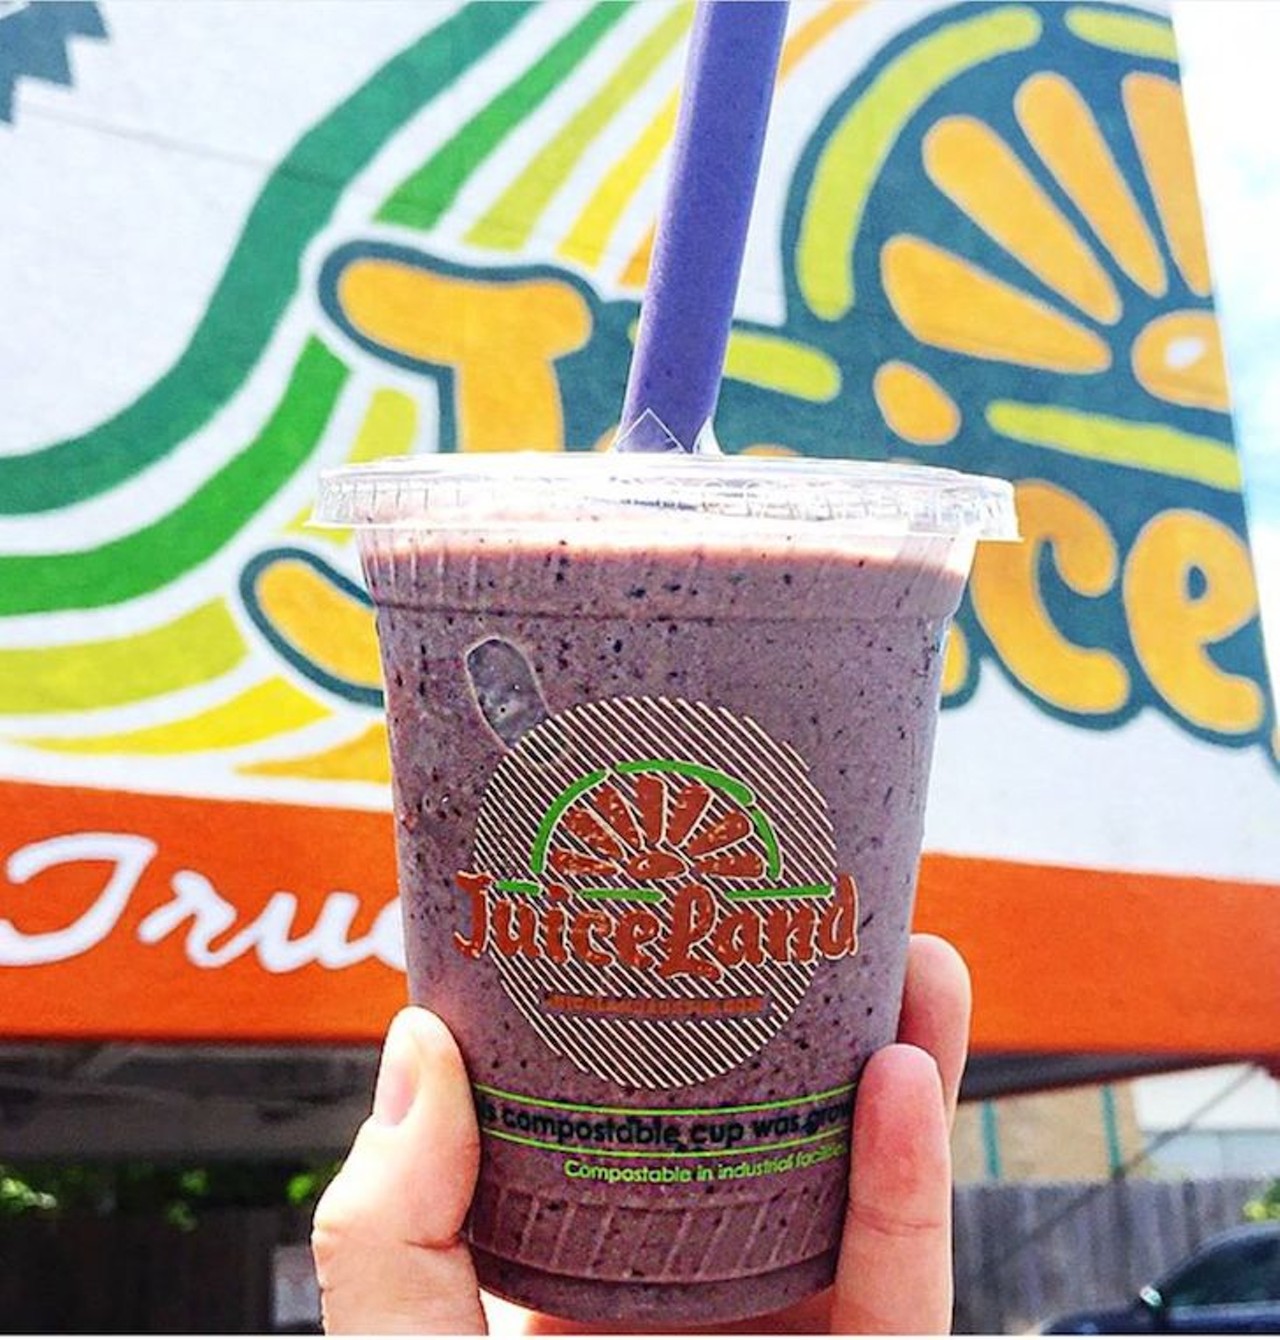 JuiceLand
JuiceLand's enthusiasm for juices and smoothies loaded with ingredients like bee pollen would make the the mini-chain an excellent choice during cedar season in the Alamo City. 
Photo via Facebook (JuiceLand)